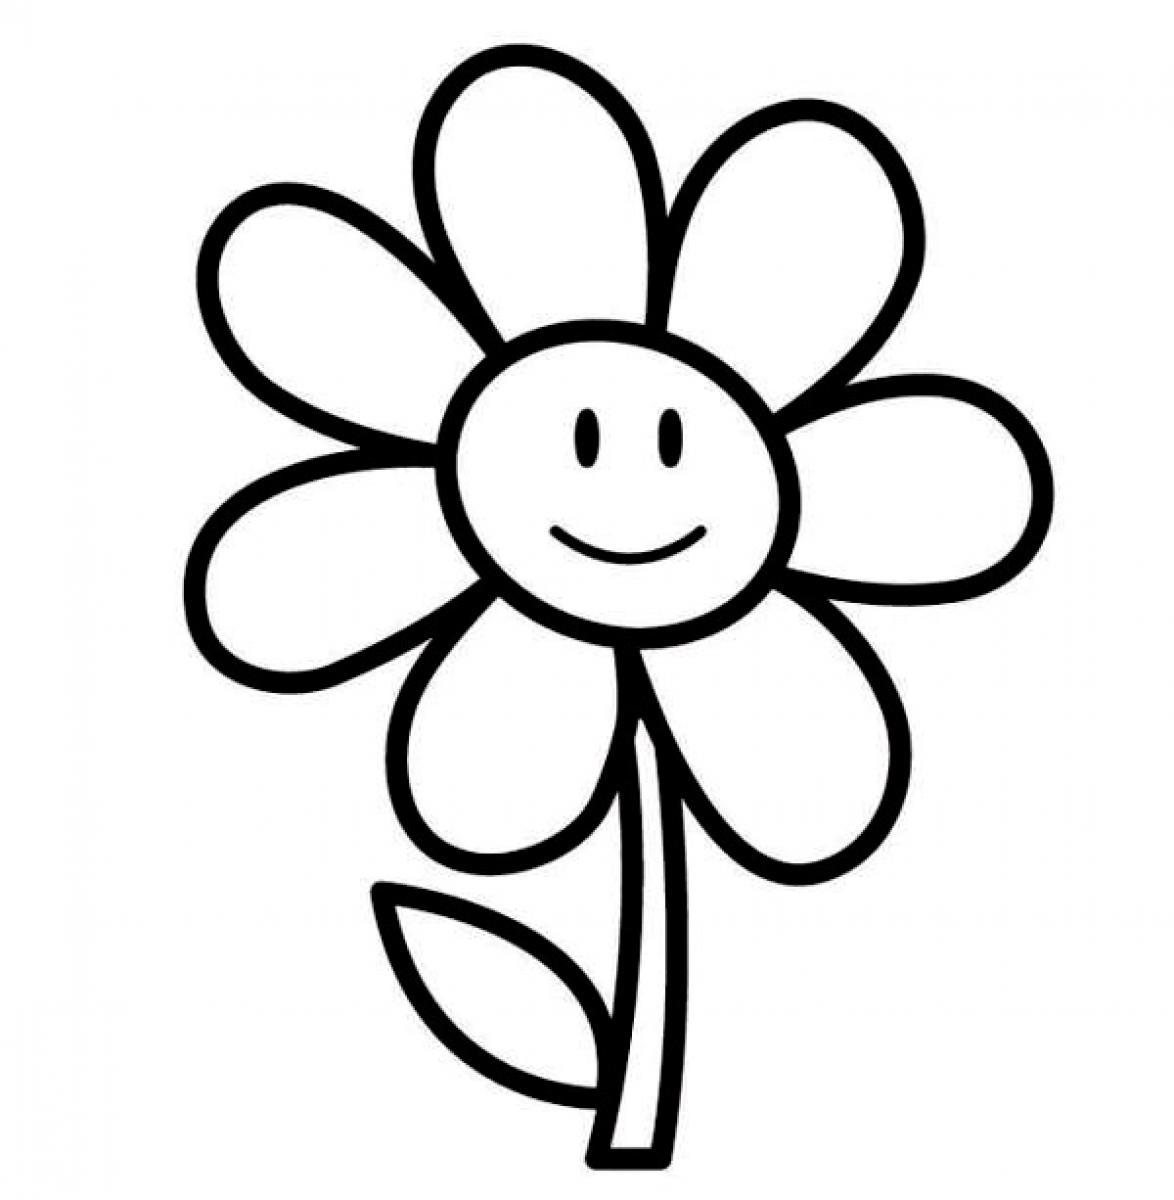 763 Animal Easy Floral Coloring Pages for Adult